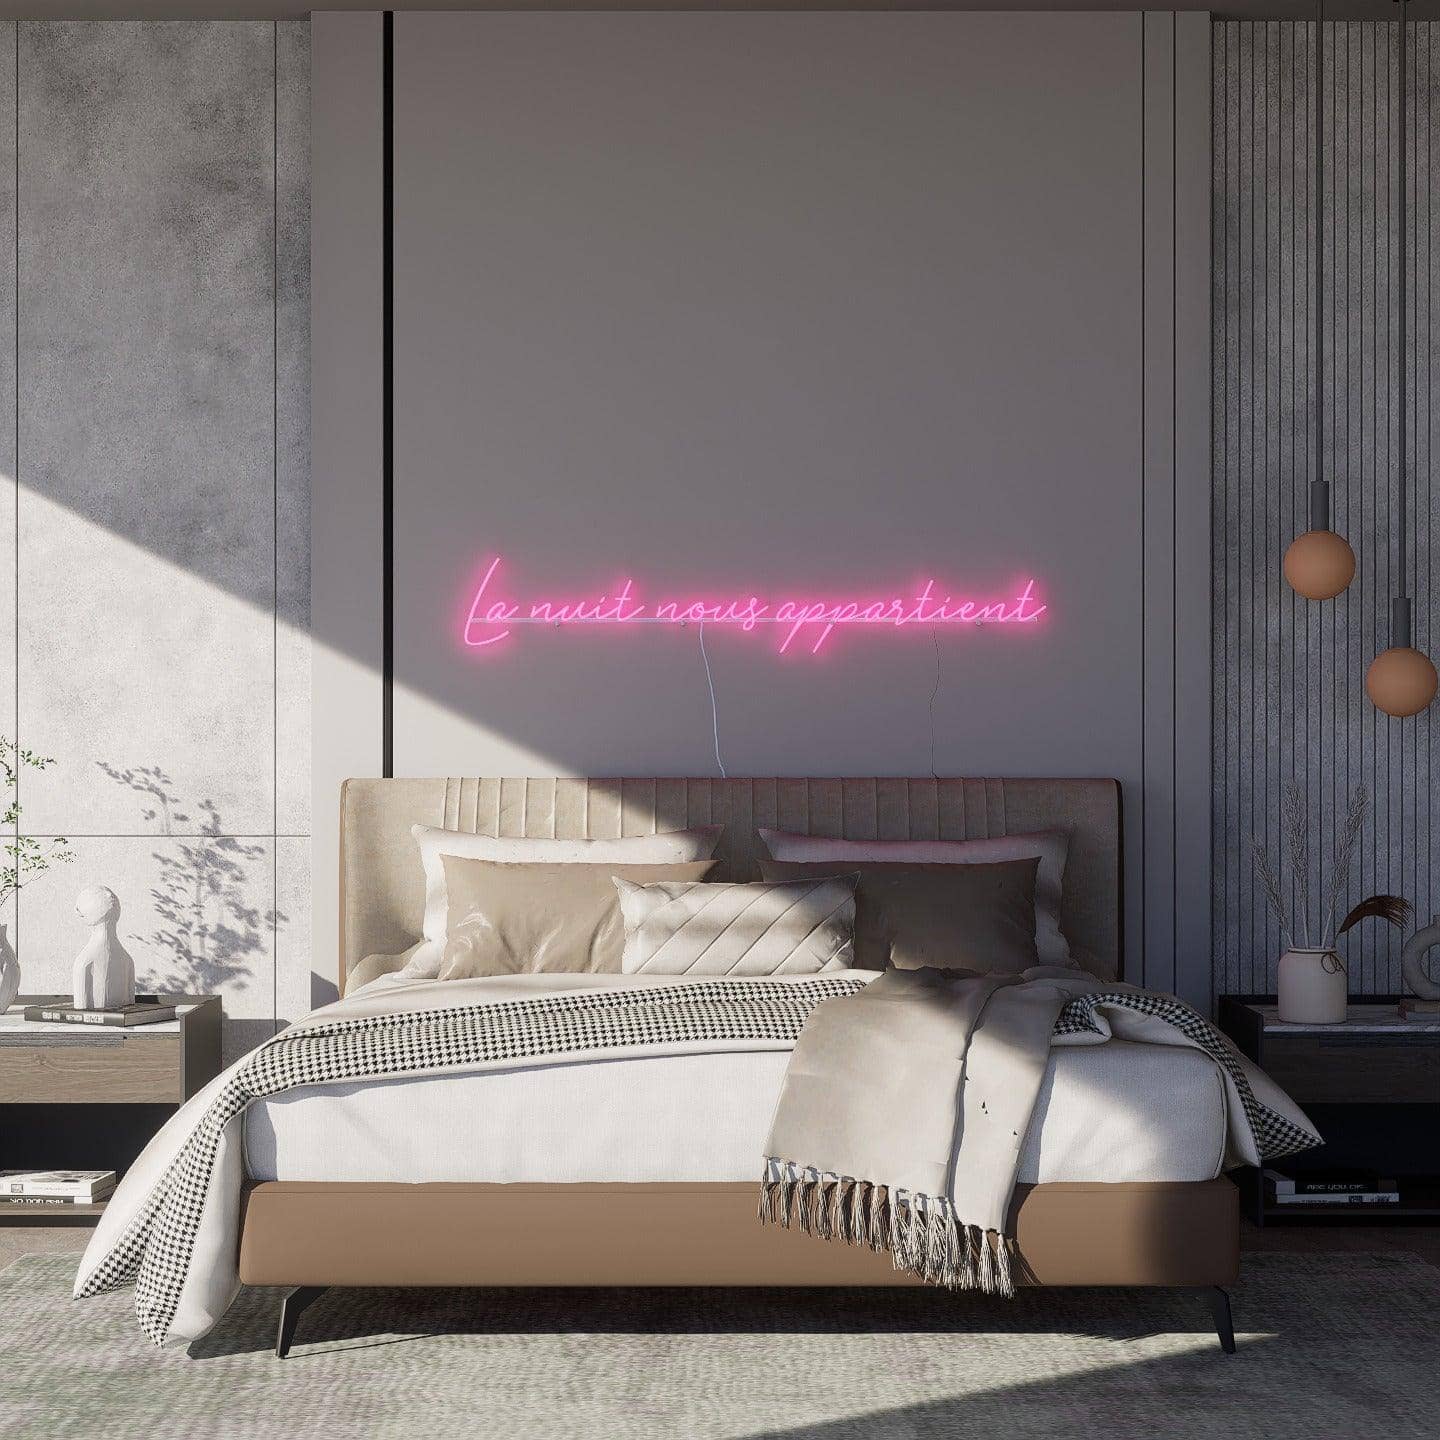 light-up-pink-neon-lights-during-the-day-and-hang-on-the-wall-for-display-la-nuit-nous-appartient